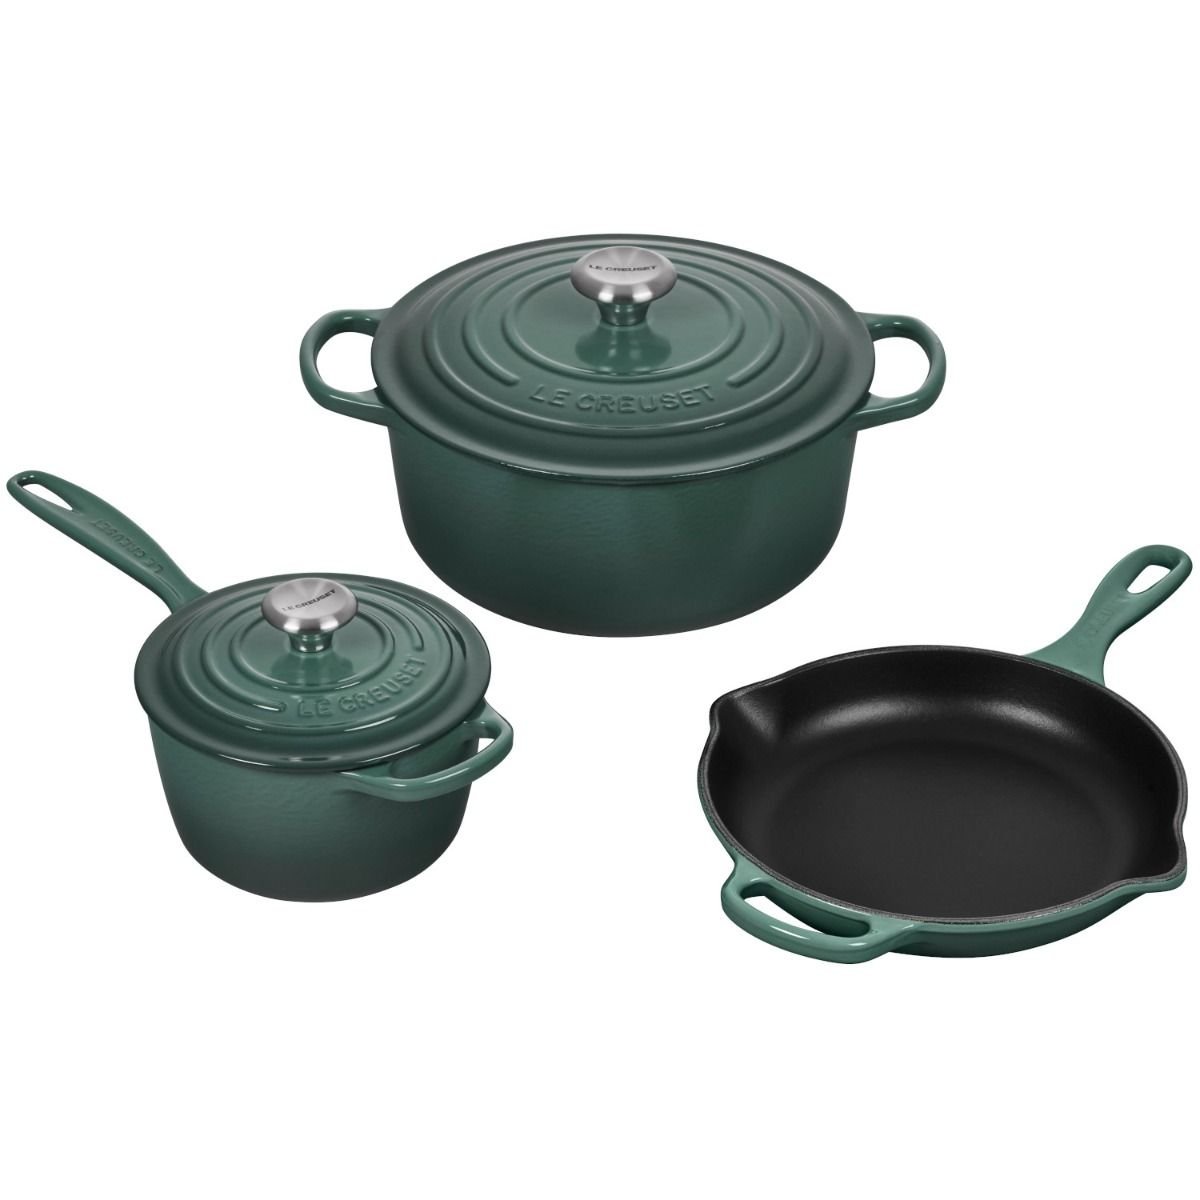 KitchenAid To Le Creuset: 9 Chic Cookware & Appliances To Add Colour To  Your Countertop